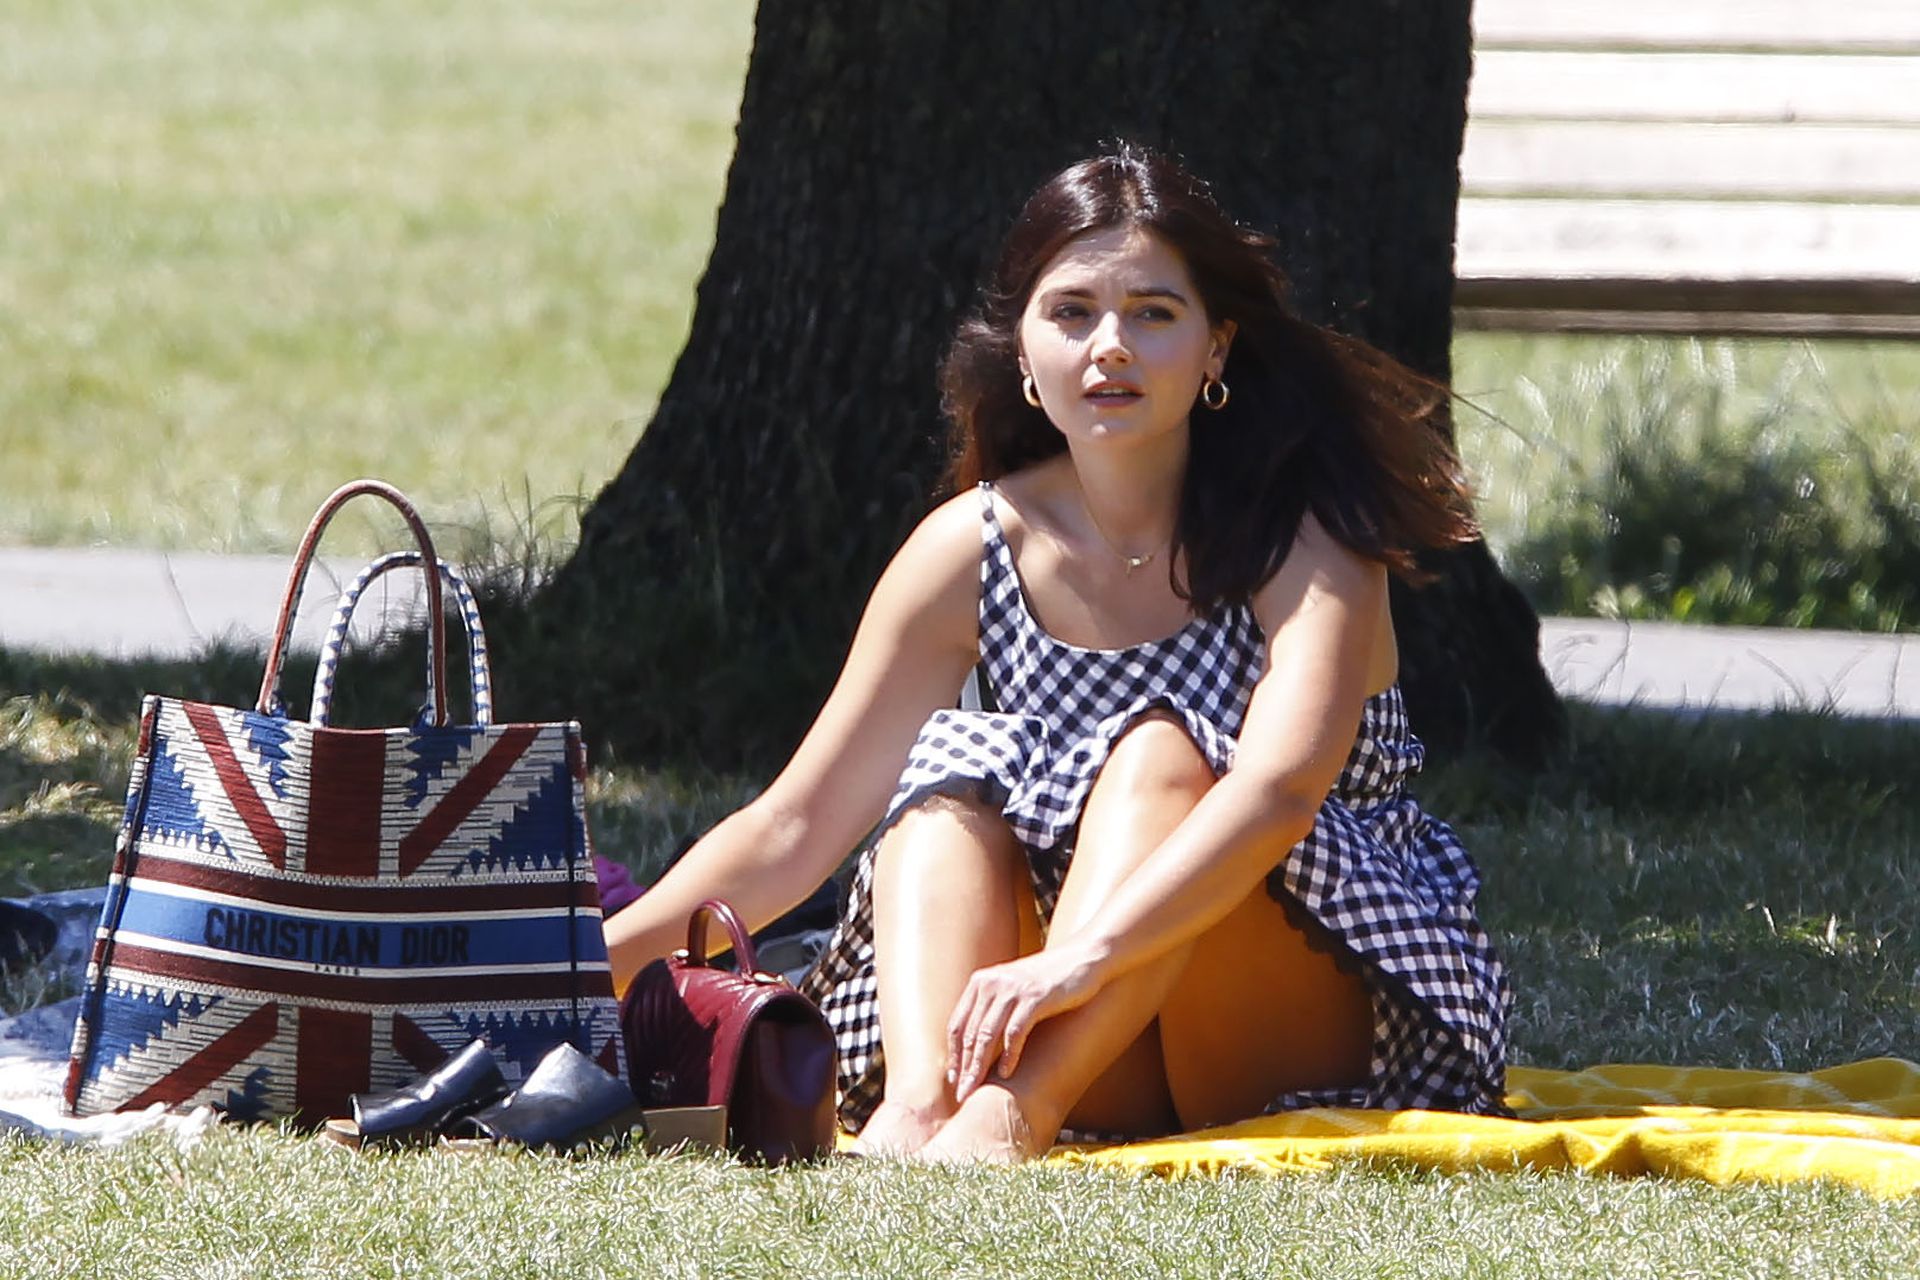 Doctor Who Actress Jenna Coleman Treats Us with a View of Her Upskirt